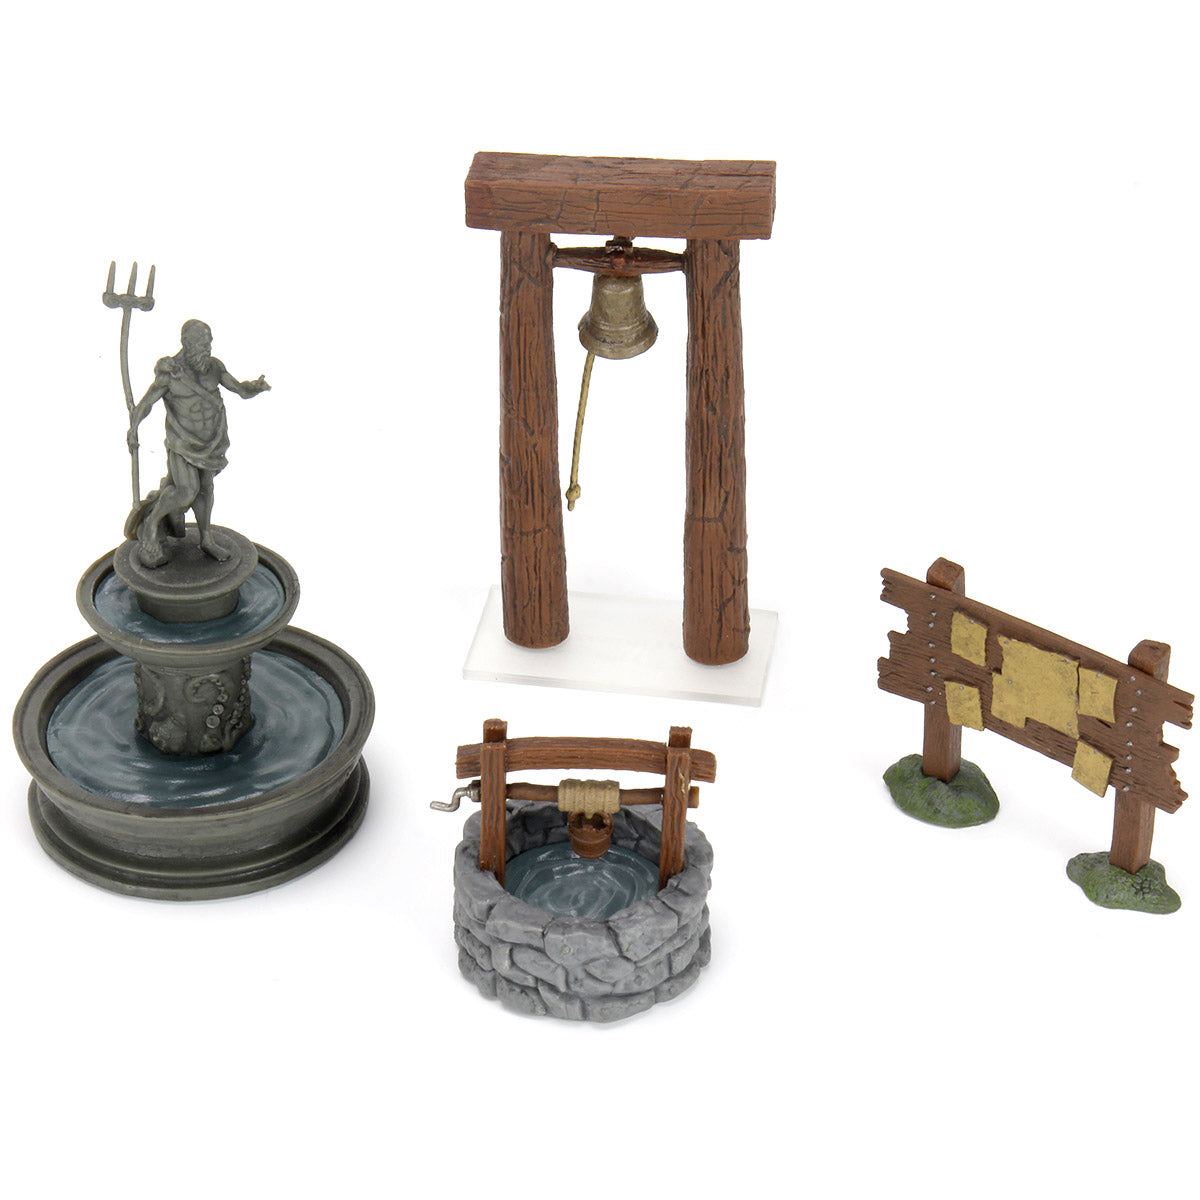 Warlock Tiles: Accessory - Marketplace - Roleplaying Games - The Hooded Goblin